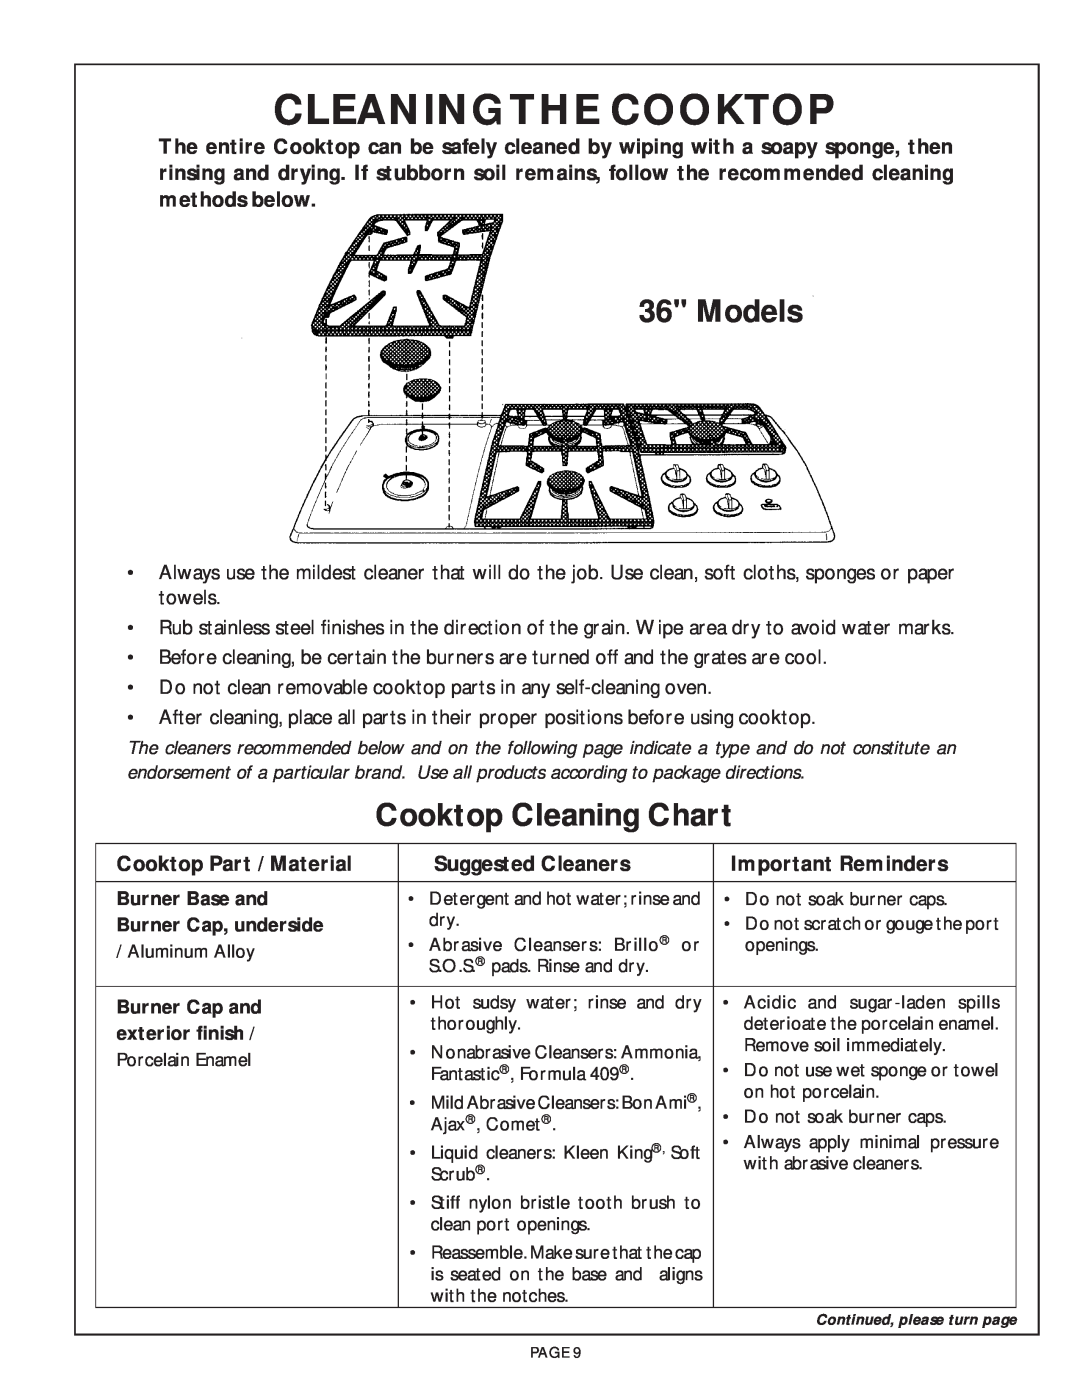 Thermador SGC456, SGCS456 Cleaningthe Cooktop, Models, Cooktop Cleaning Chart, Cooktop Part / Material, Suggested Cleaners 